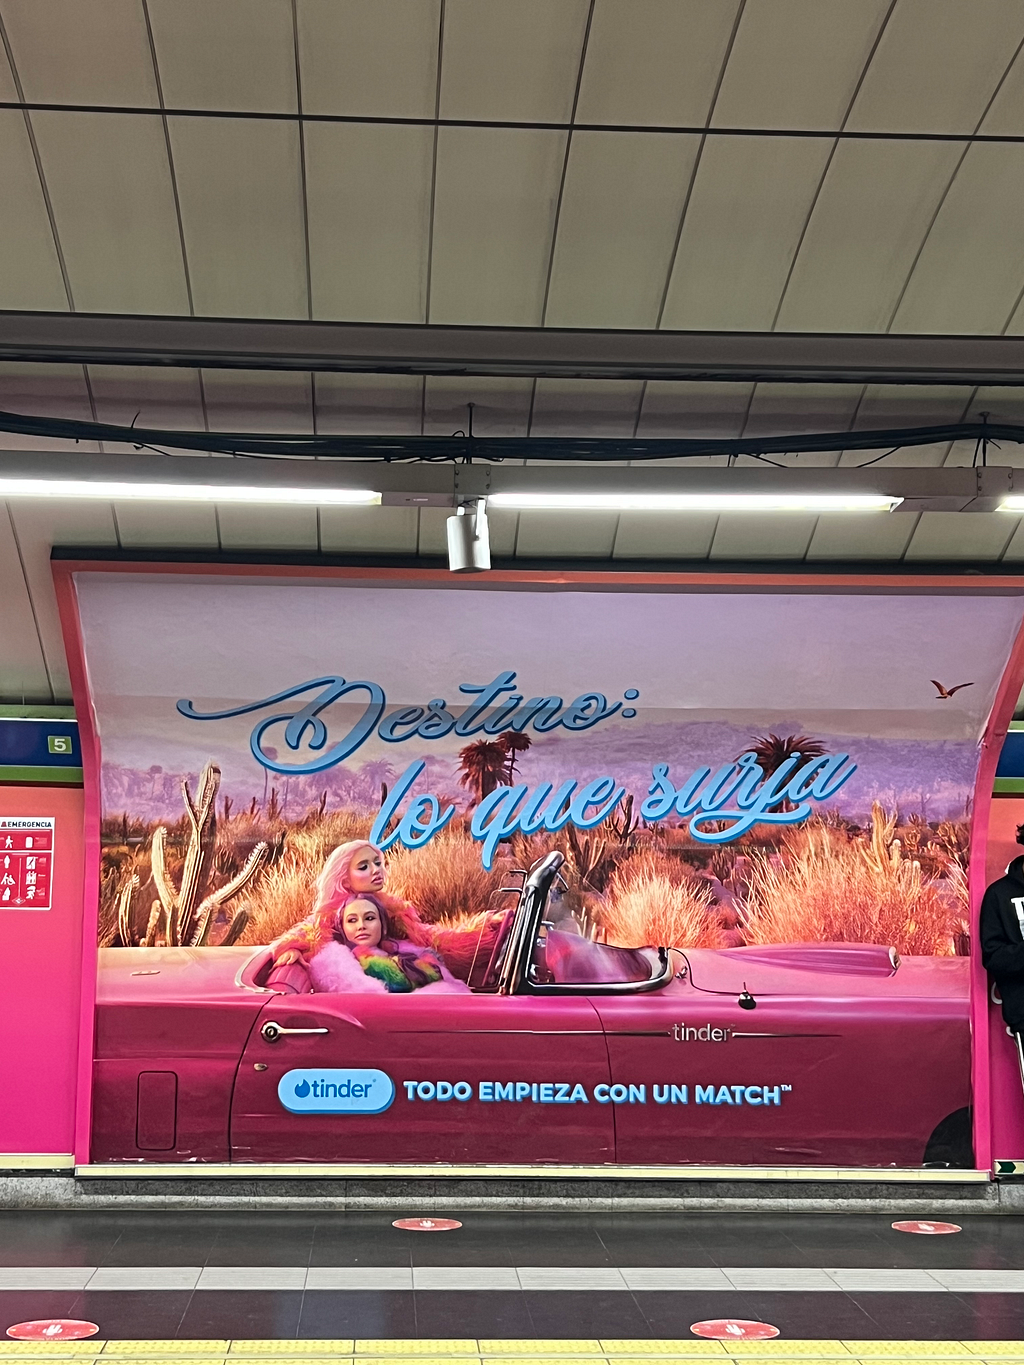 Photo of two women in a car, from Madrid subway station, the tagline reads “ Destiny: whatever come up”